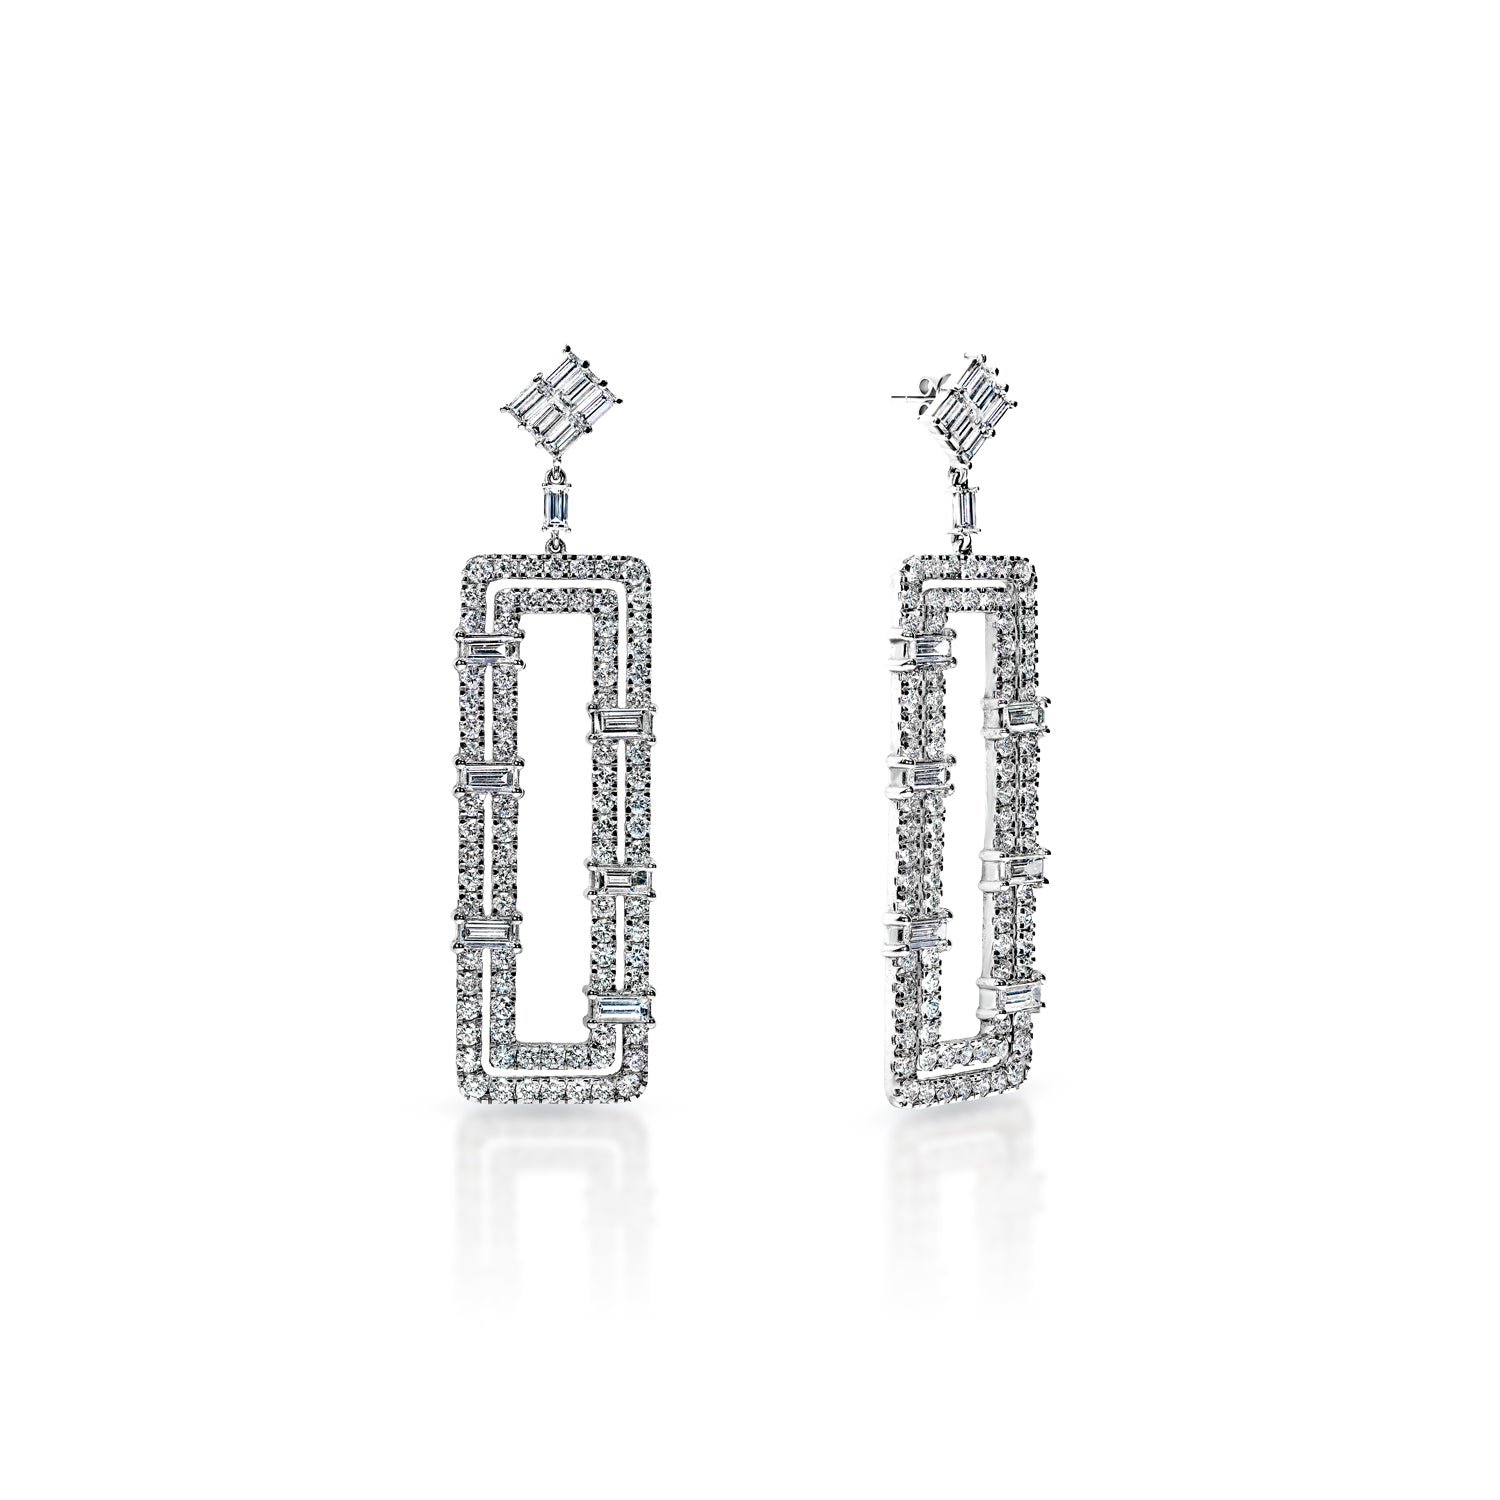 Vida 12 Carats Rectangular Shape Hanging Earrings in 14k White Gold Front and Side View